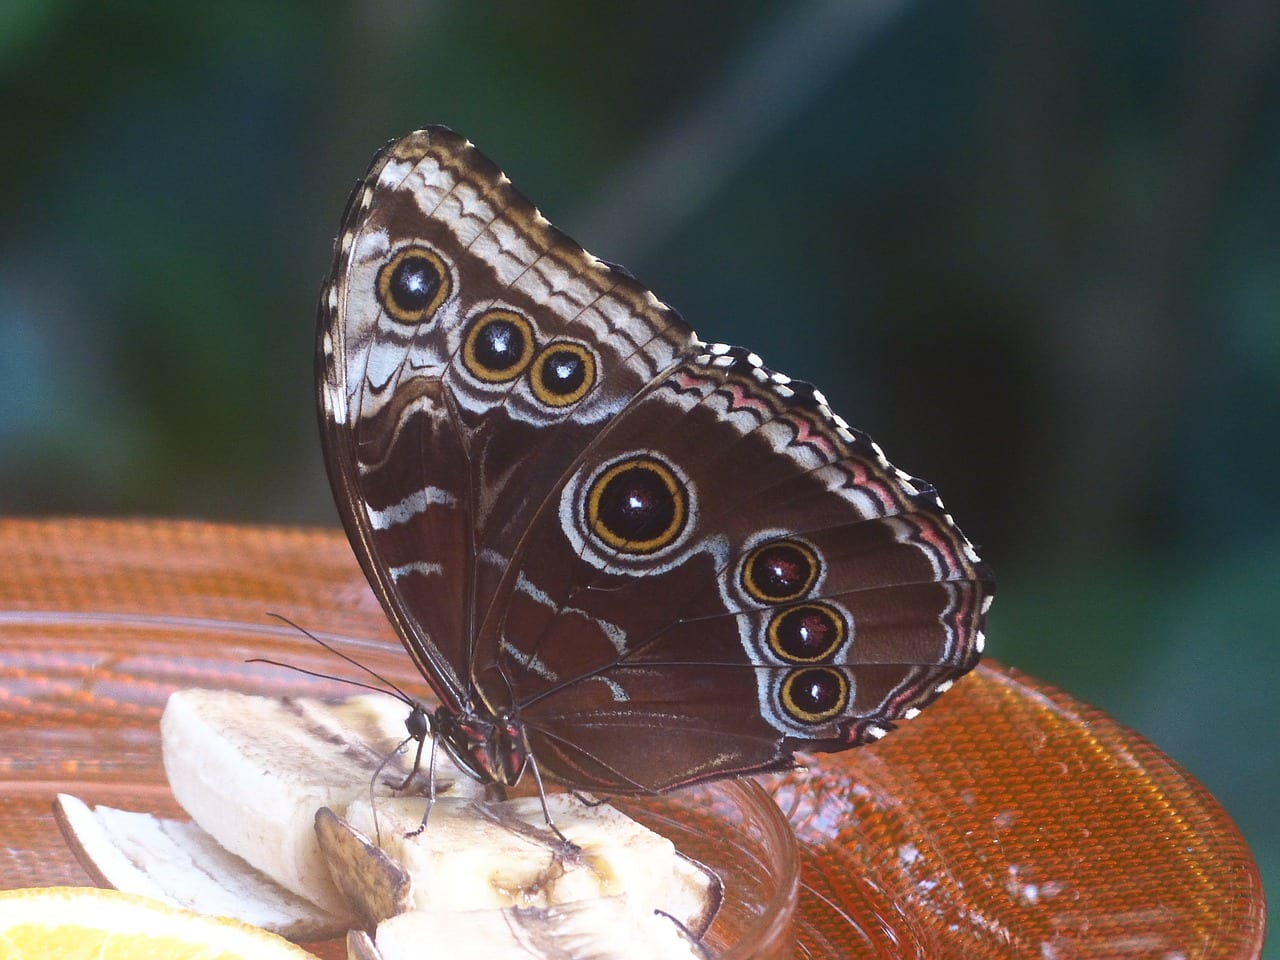 Mimicry: Deception Helps Many Animals Survive in the Natural World